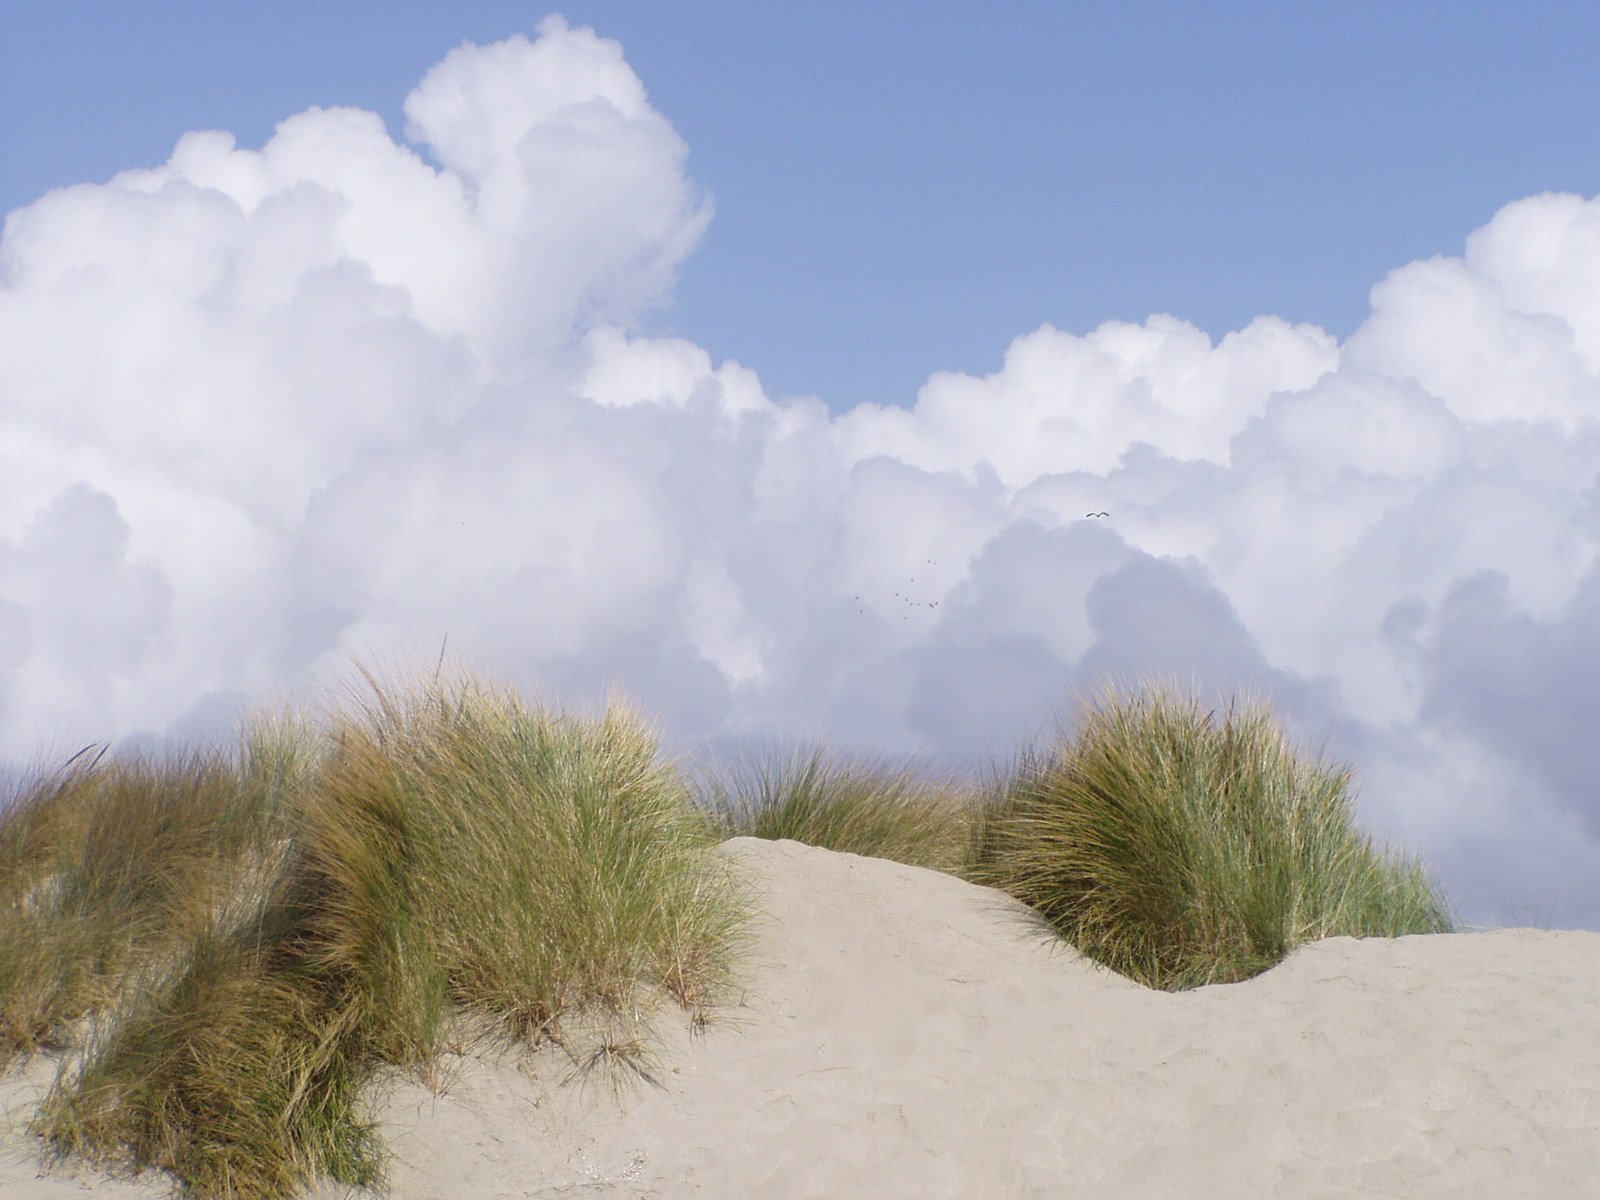 white clouds in the sky over grass and sand